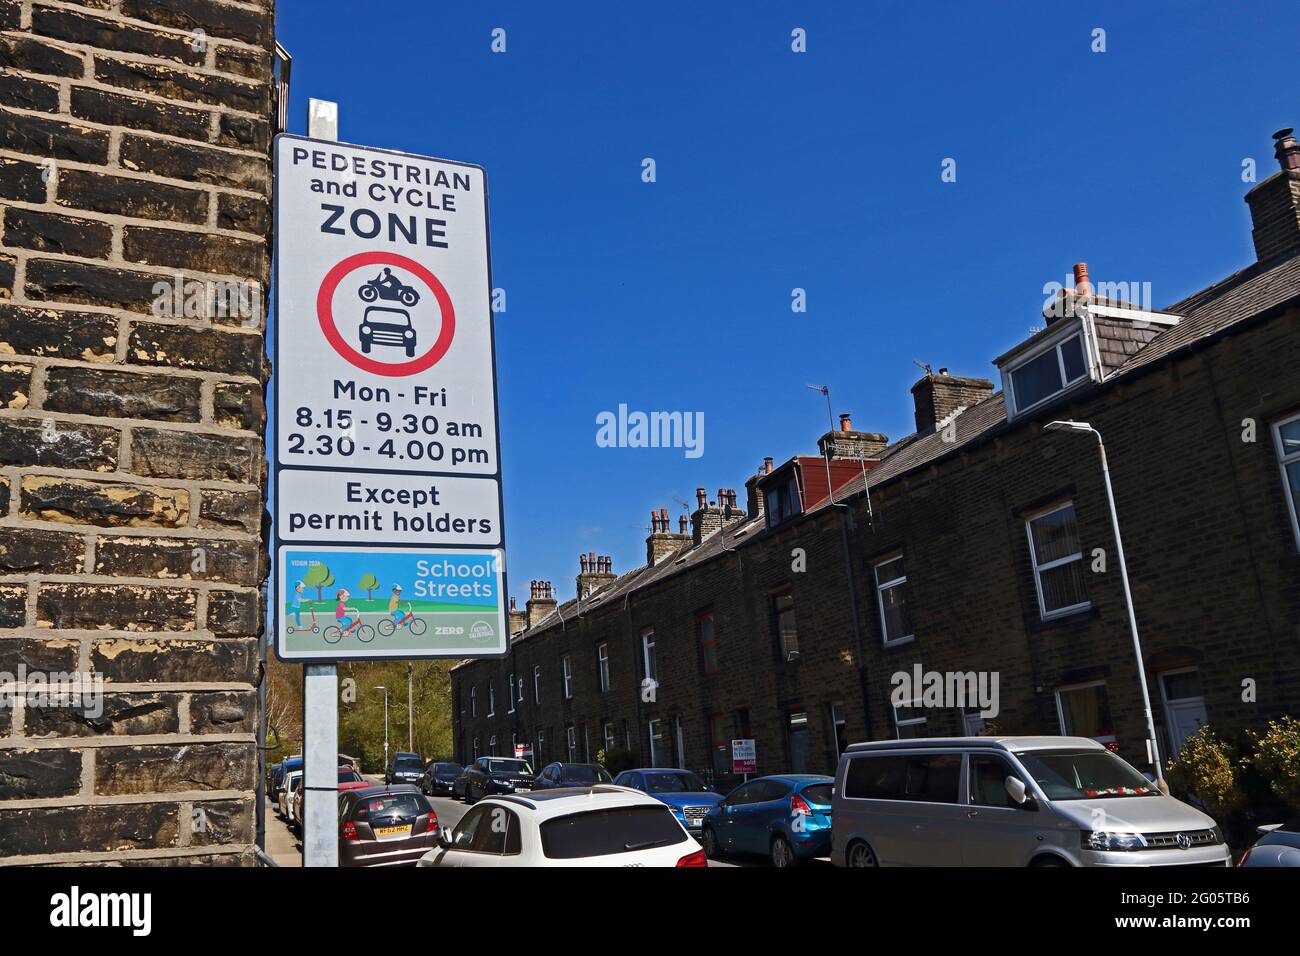 Restricted Pedestrian and Cycle Zone sign, Mytholmroyd Stock Photo